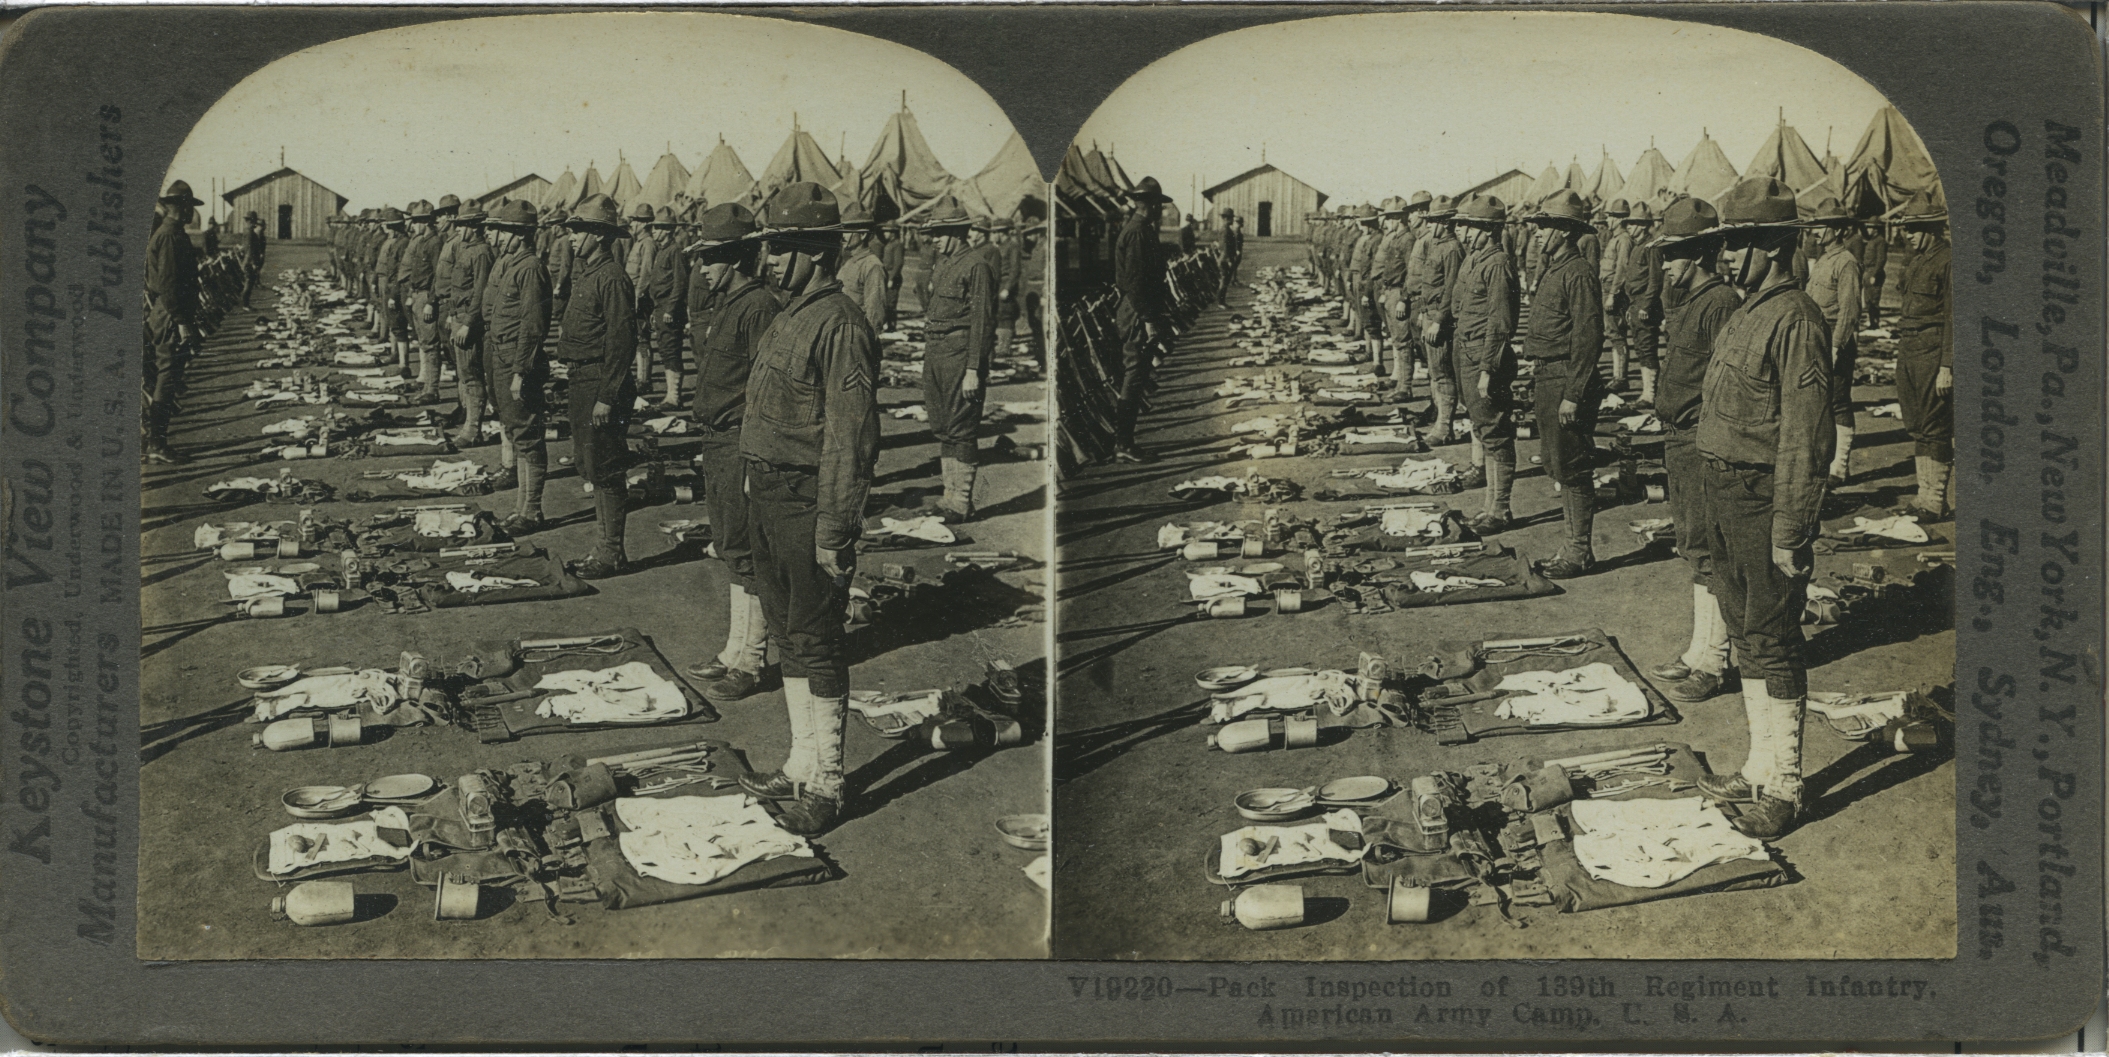 Pack Inspection of 139th Regiment Infantry, American Army Camp